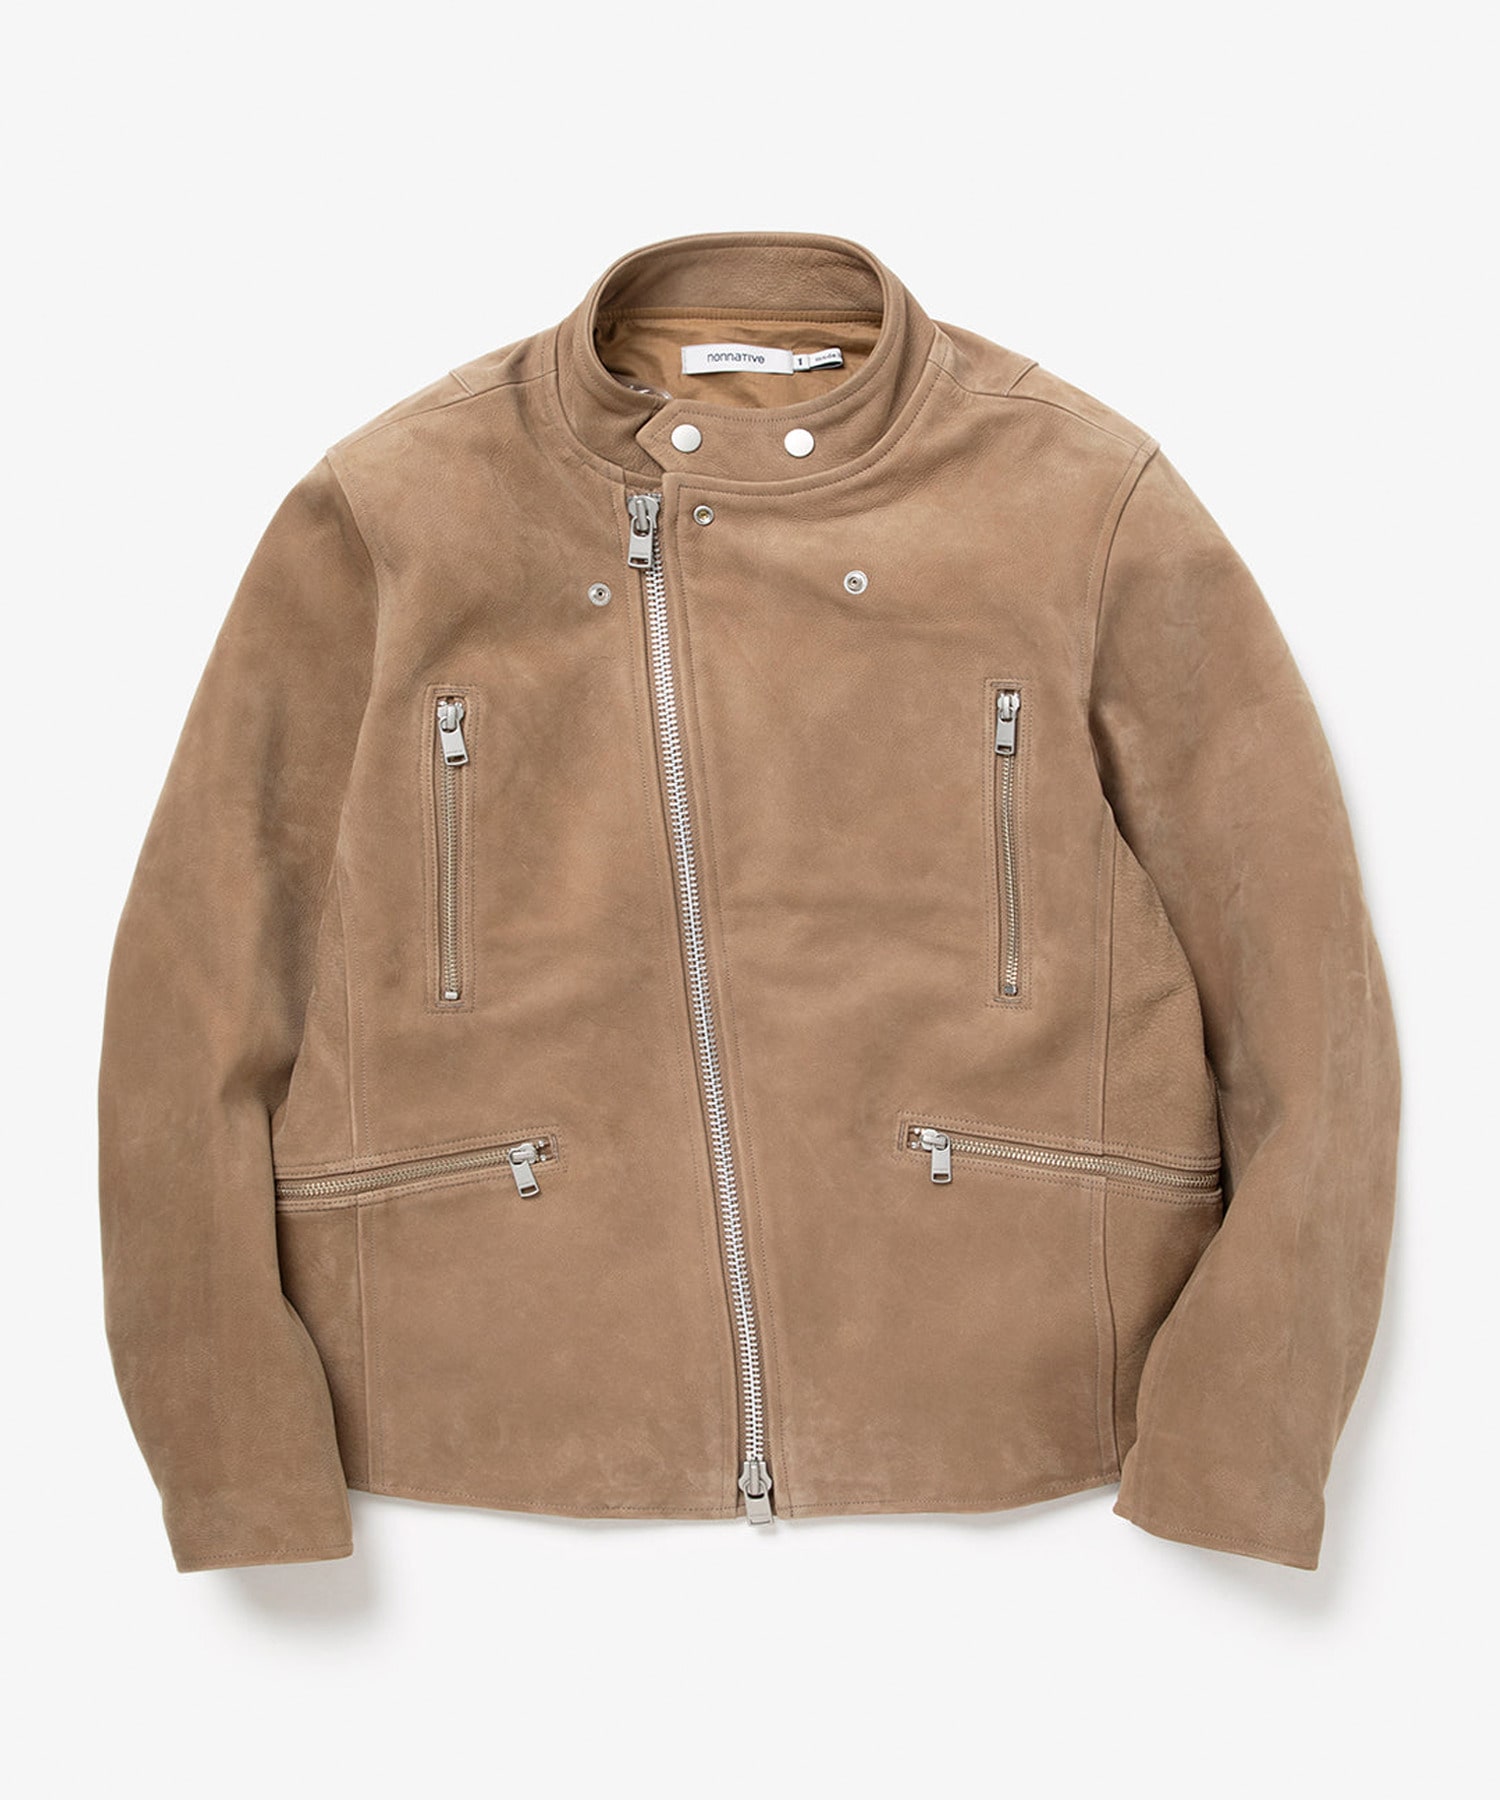 nonnative / RIDER BLOUSON COW LEATHER by ECCO｜ESTNATION ONLINE  STORE｜エストネーション 公式通販